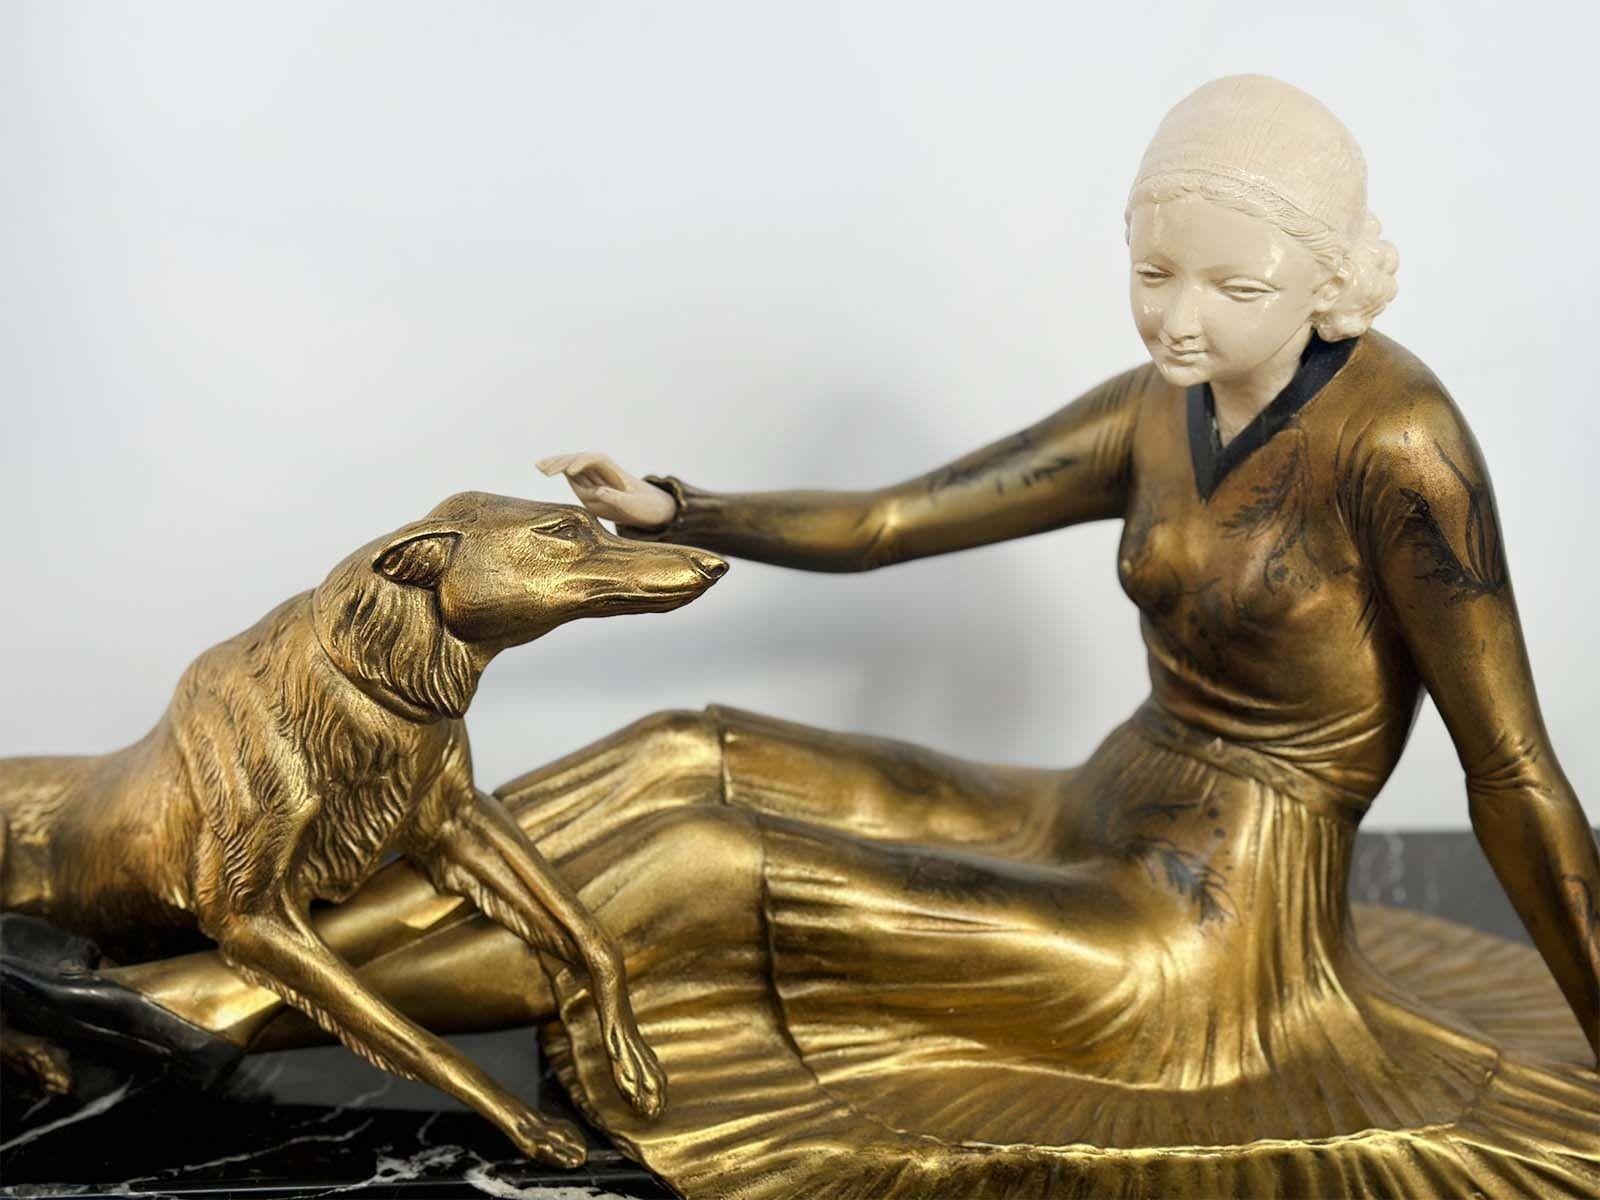 Splendid Art deco sculpture of a woman and her Borzoi dog sculpted from white metal and bronze patina finish; it is resting on a black marble base. Made by Cham (Amédée Charles Henri, Compte de Noé) in France in the 1920's. It includes a 